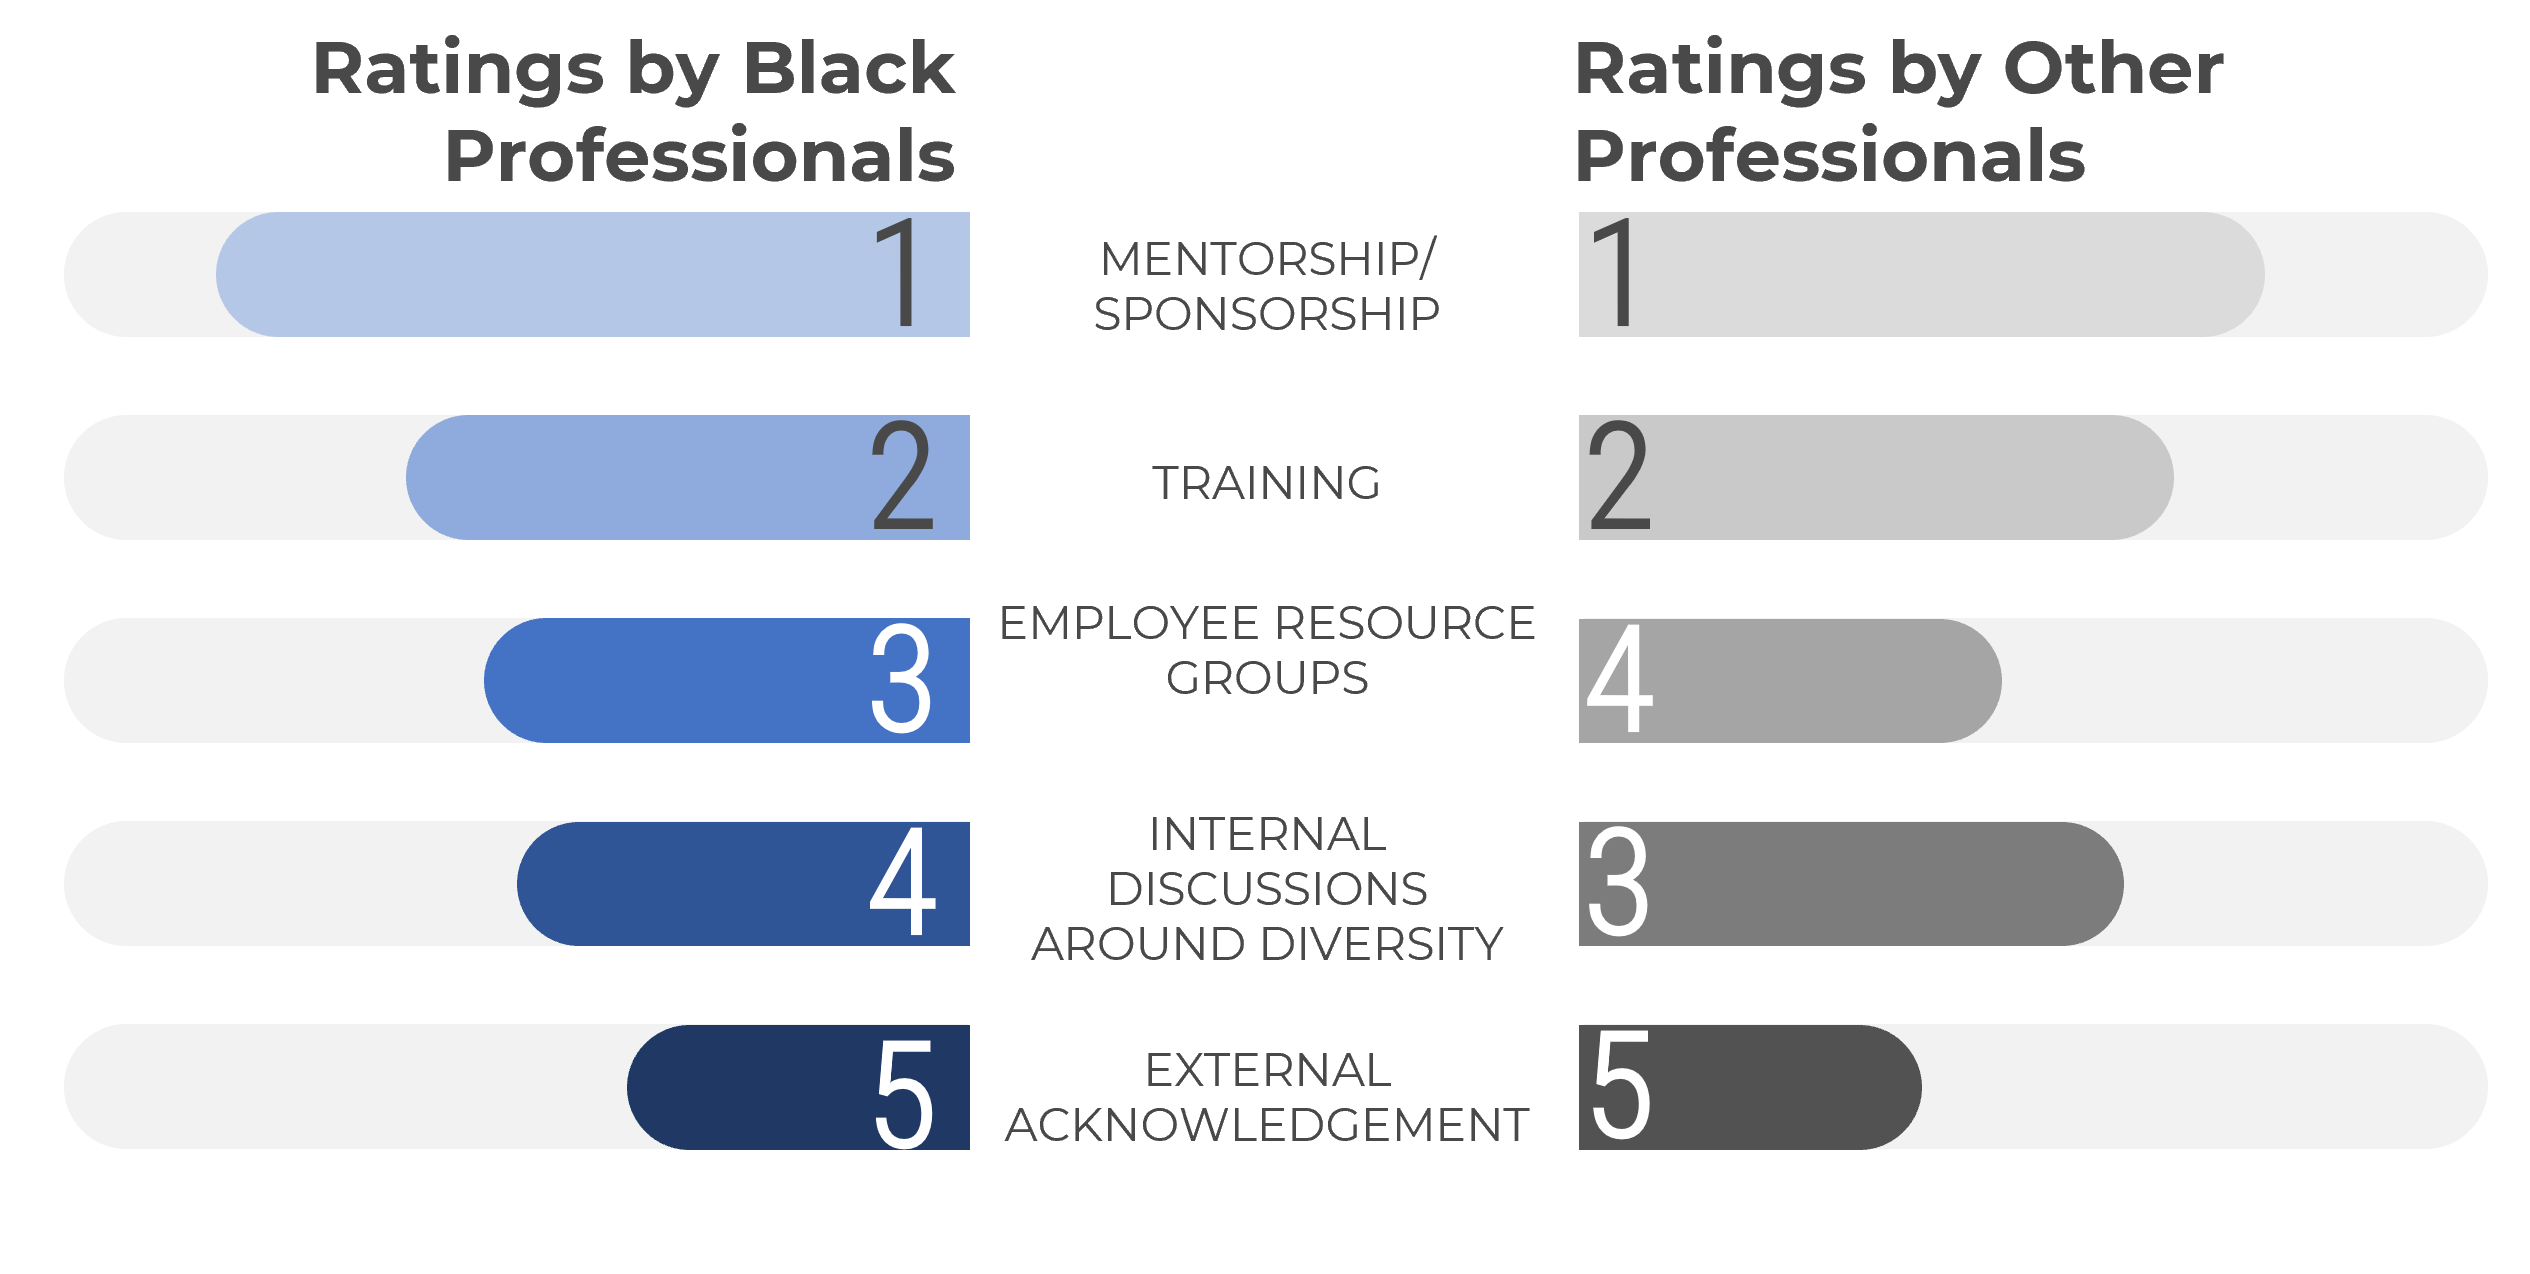 An image showing how respondents rate a number of categories, sorted into Ratings by Black Professionals, and Ratings by Other Professionals